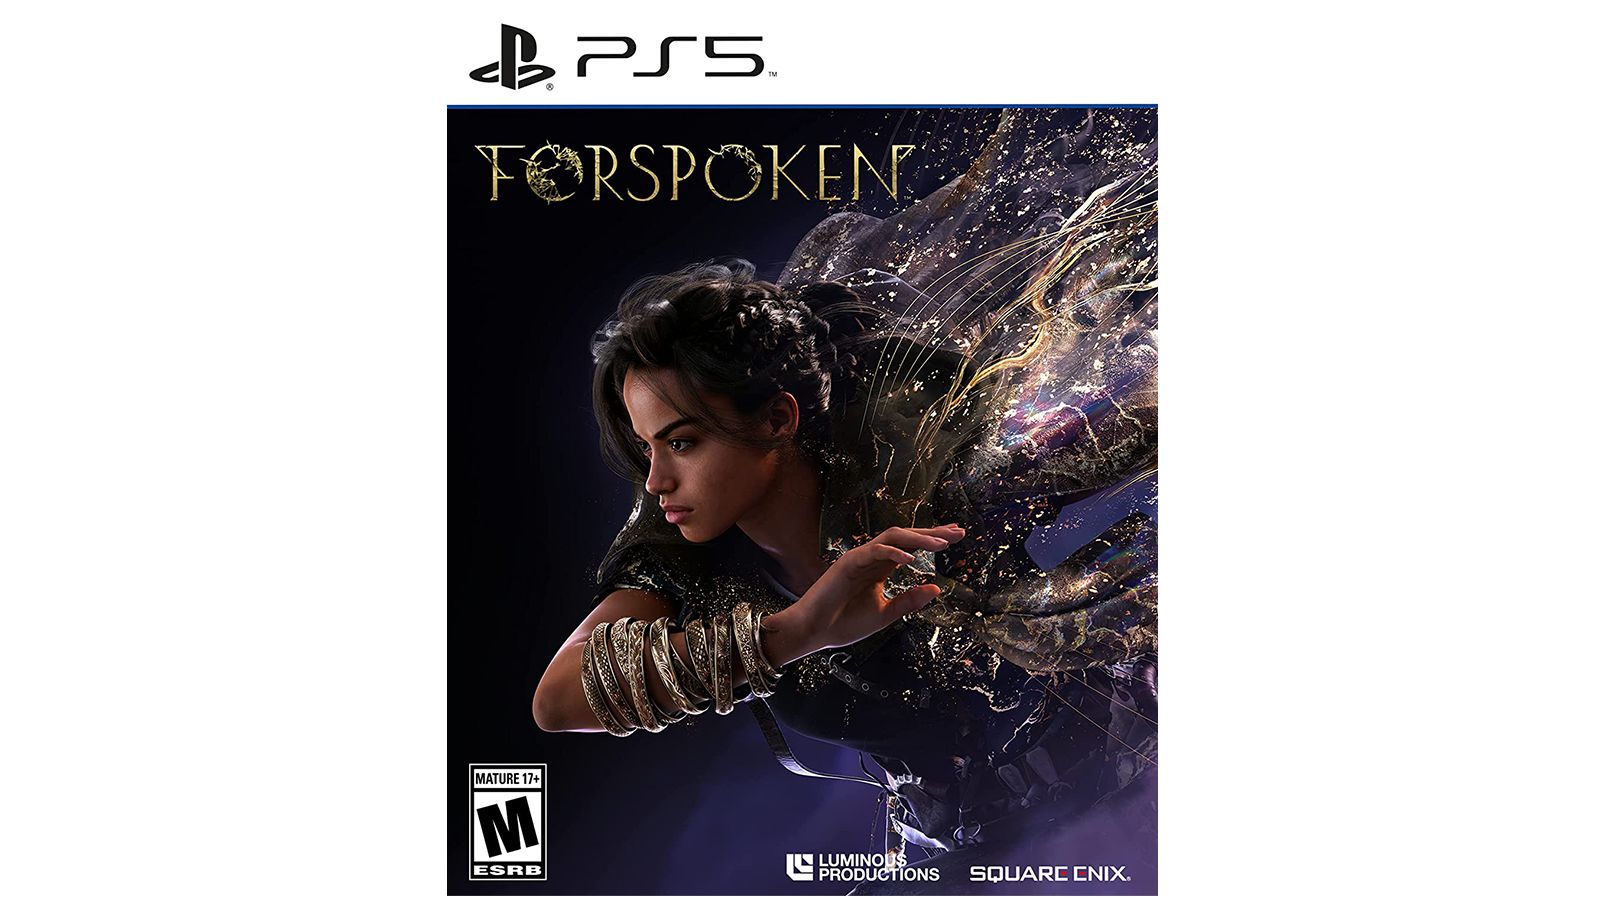 More Information on PS5 Console Exclusive Forspoken Coming Later This Year